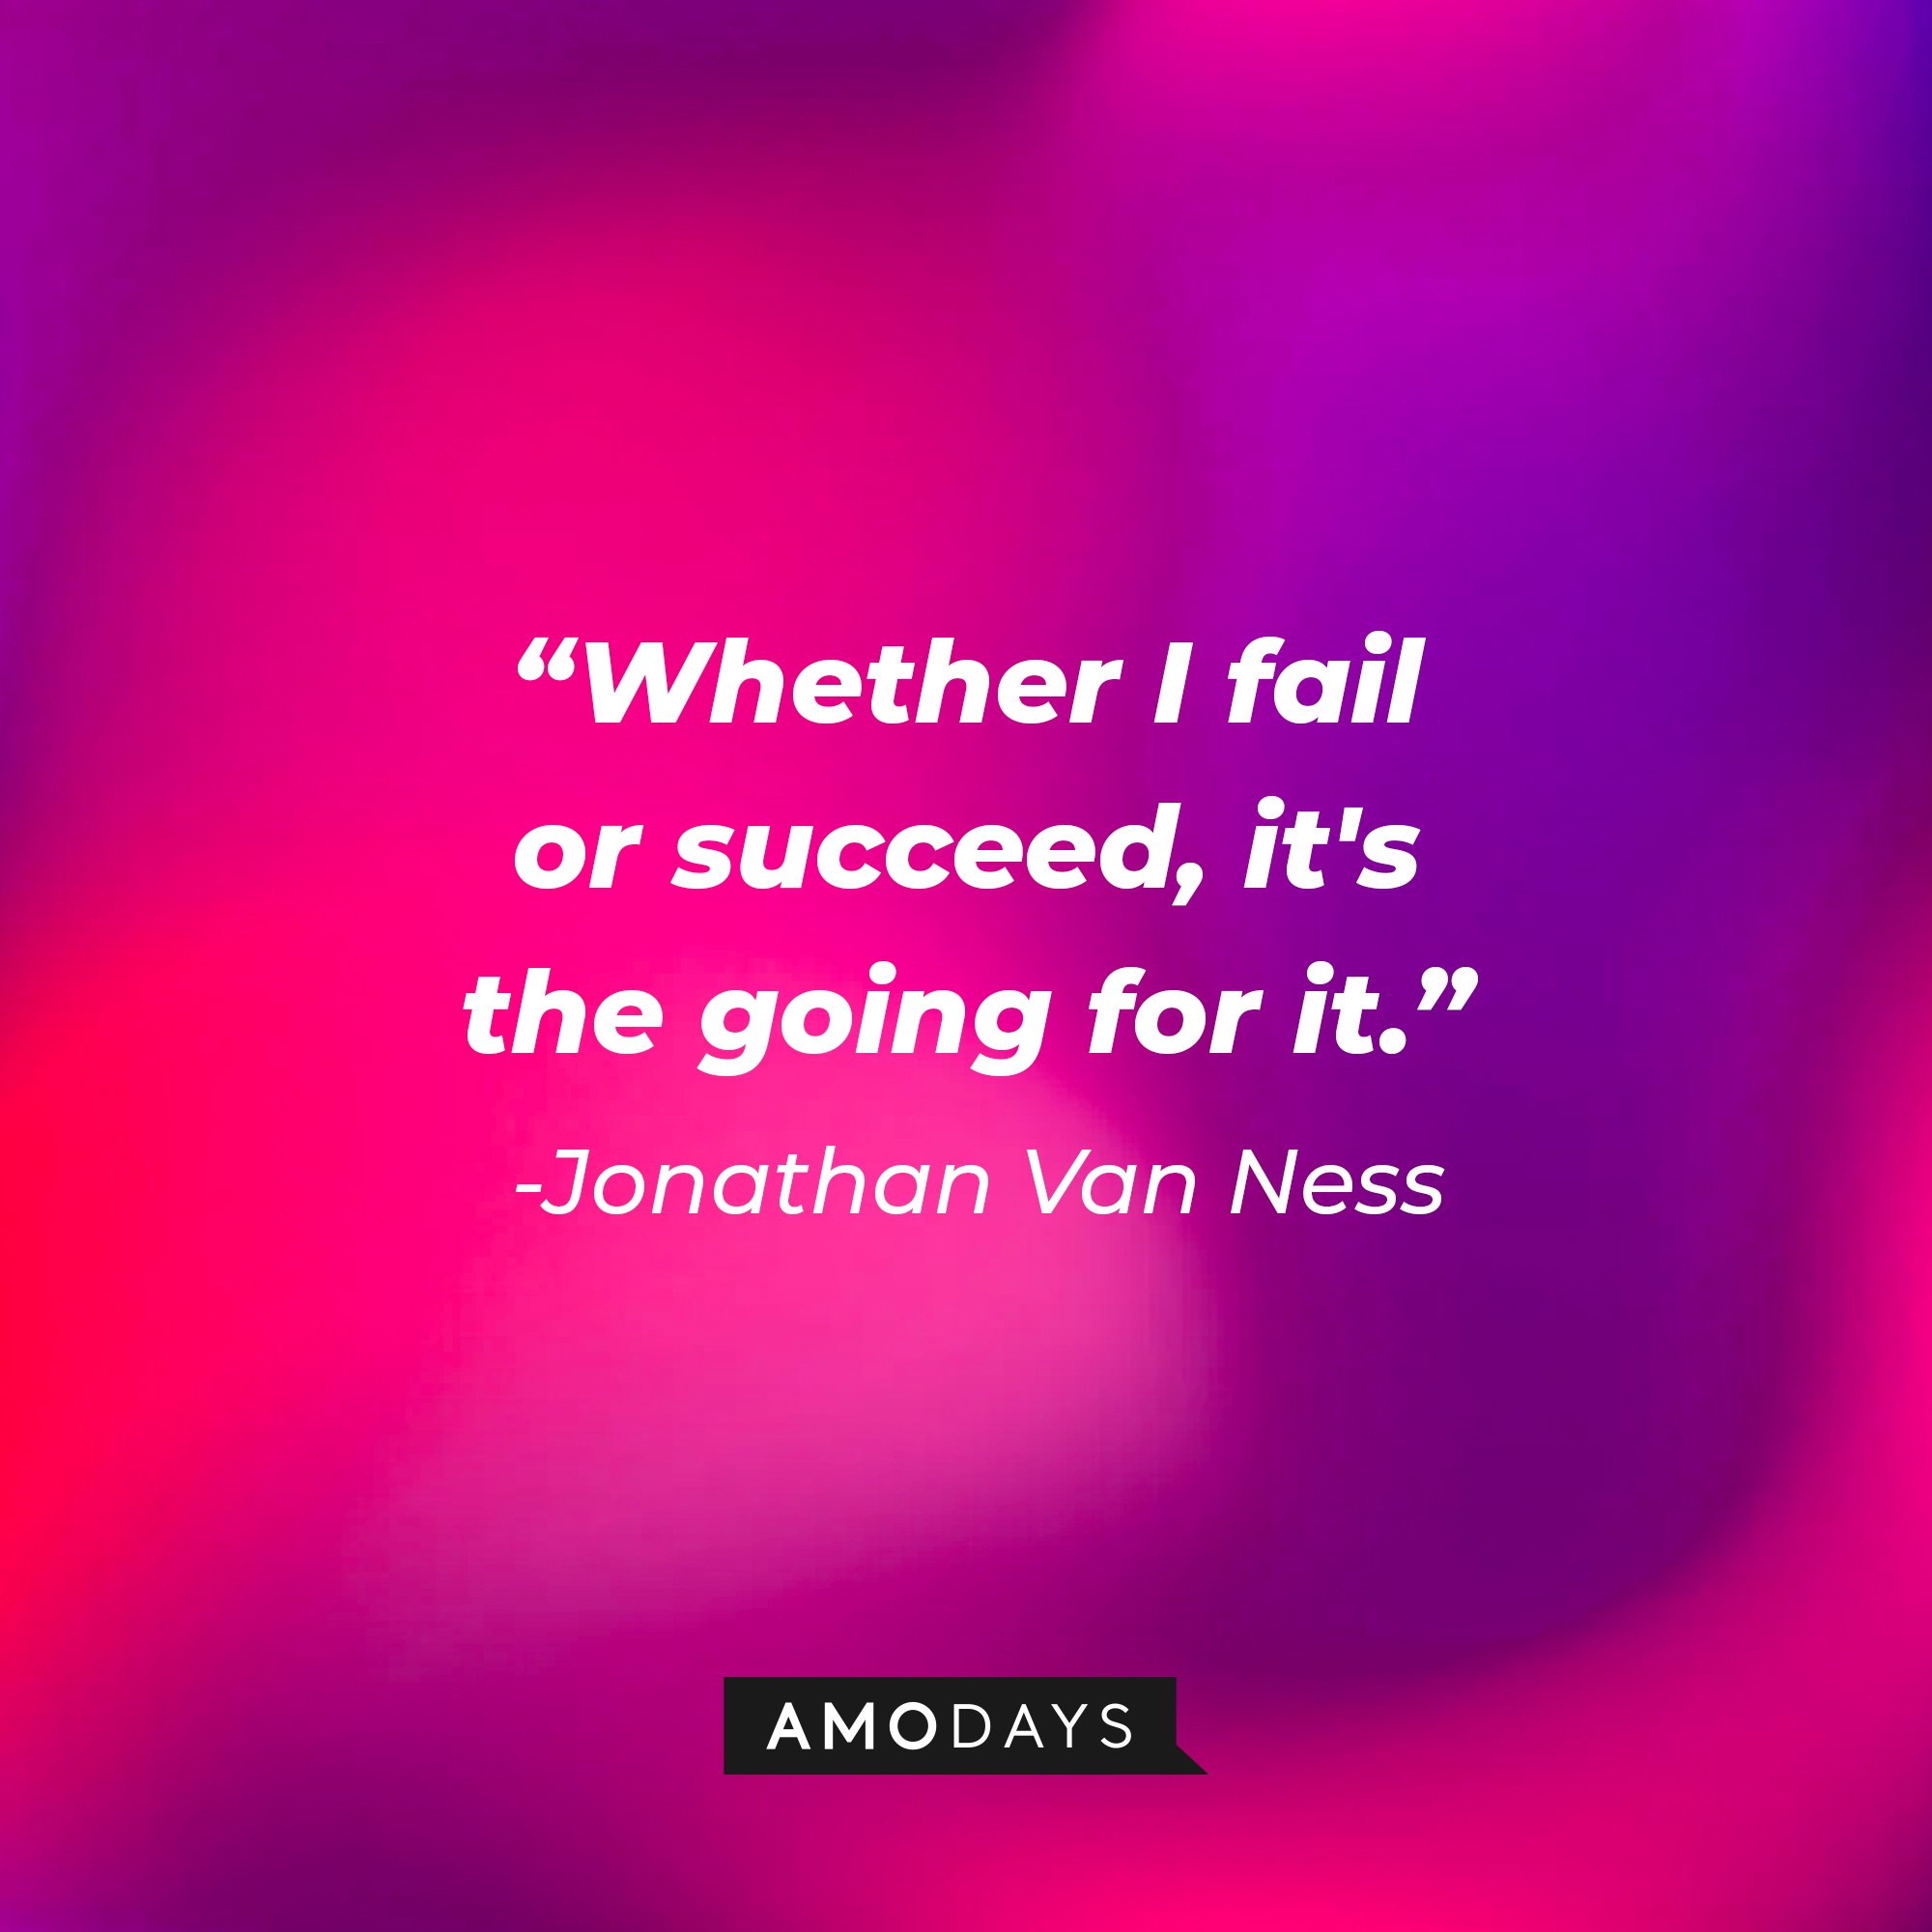 Jonathan Van Ness’ quote: "Whether I fail or succeed, it's the going for it."  | Image: AmoDays